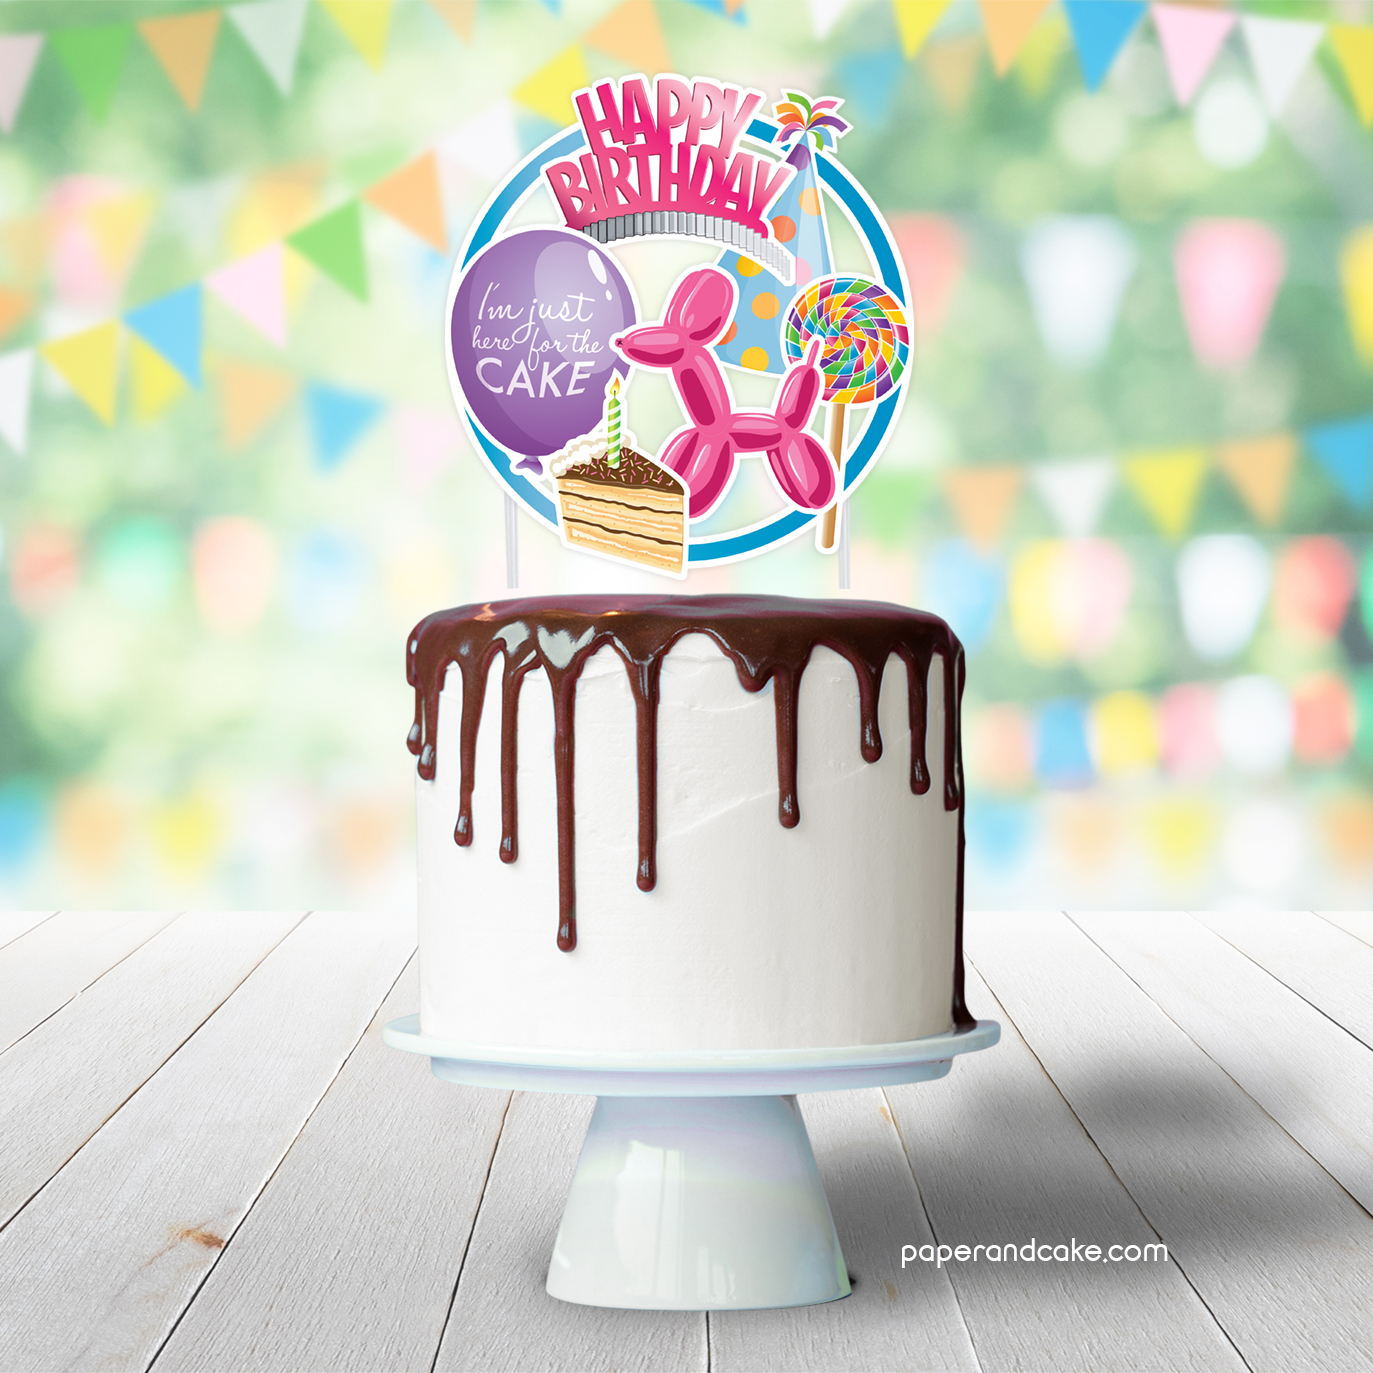 Happy Birthday Cake topper - Paper and Cake